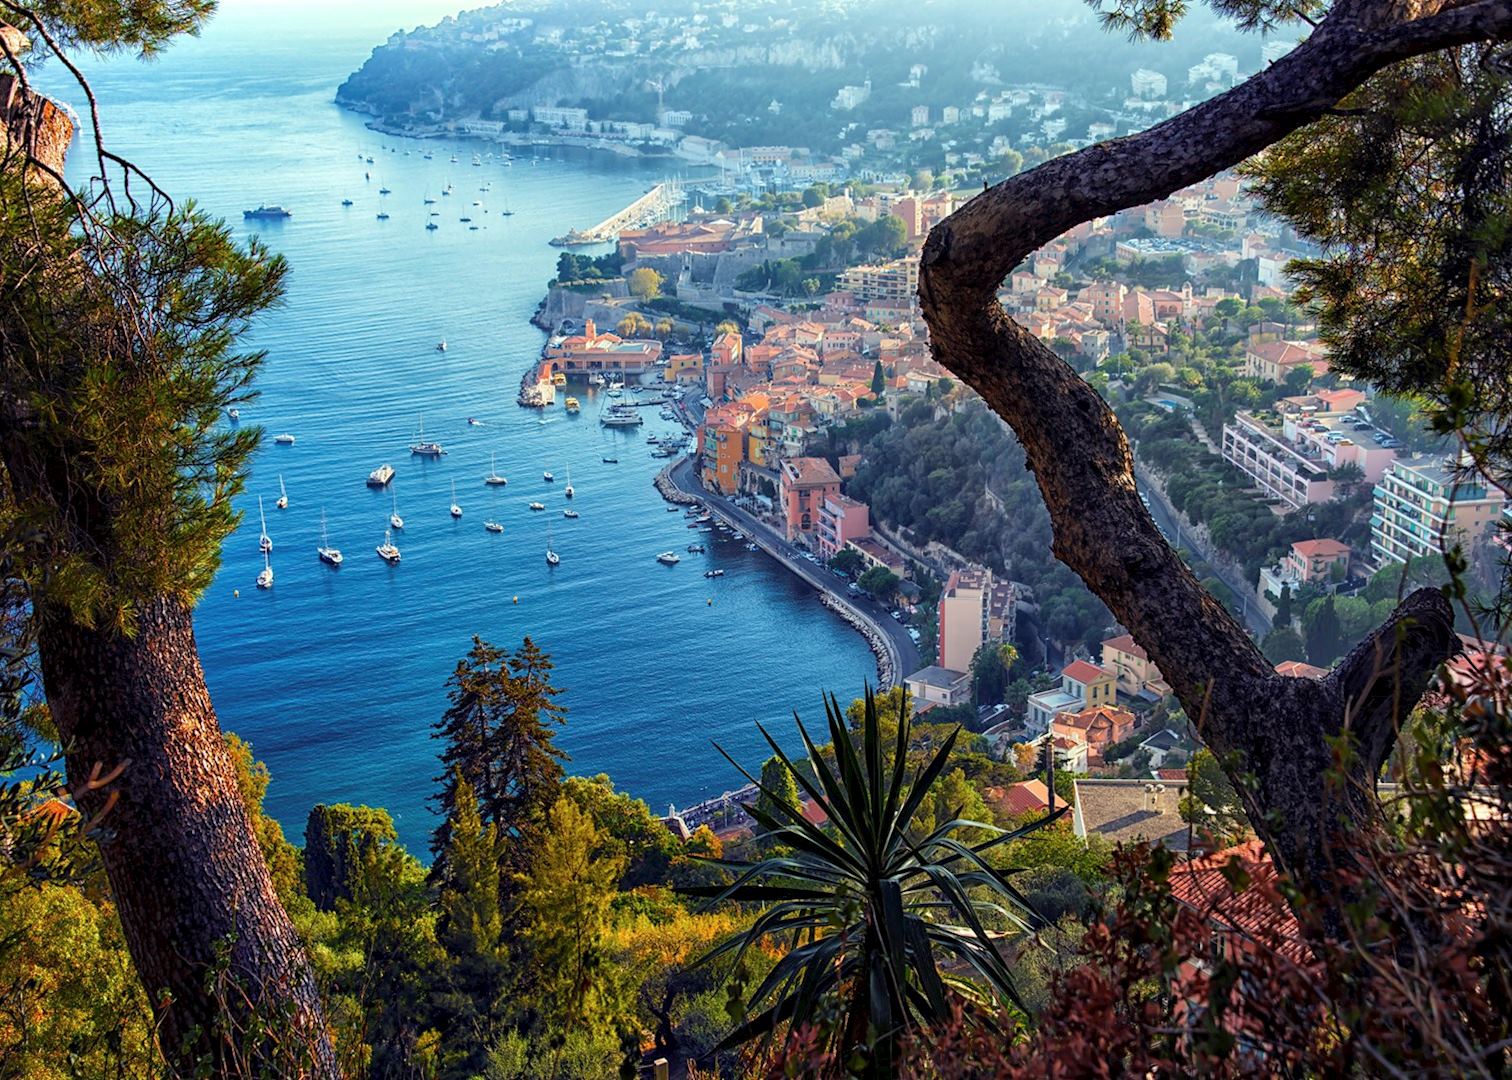 Follow Our Guide for an Unforgettable Walking Tour in Nice 